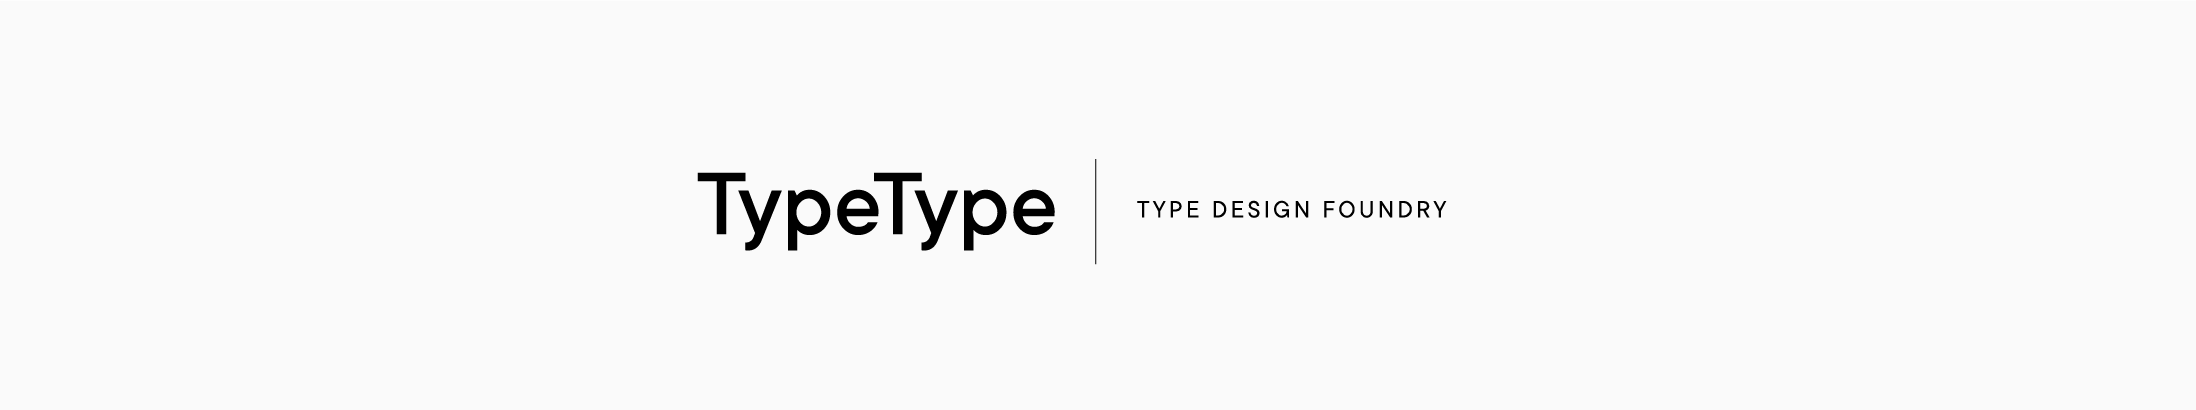 TypeType foundry's profile banner